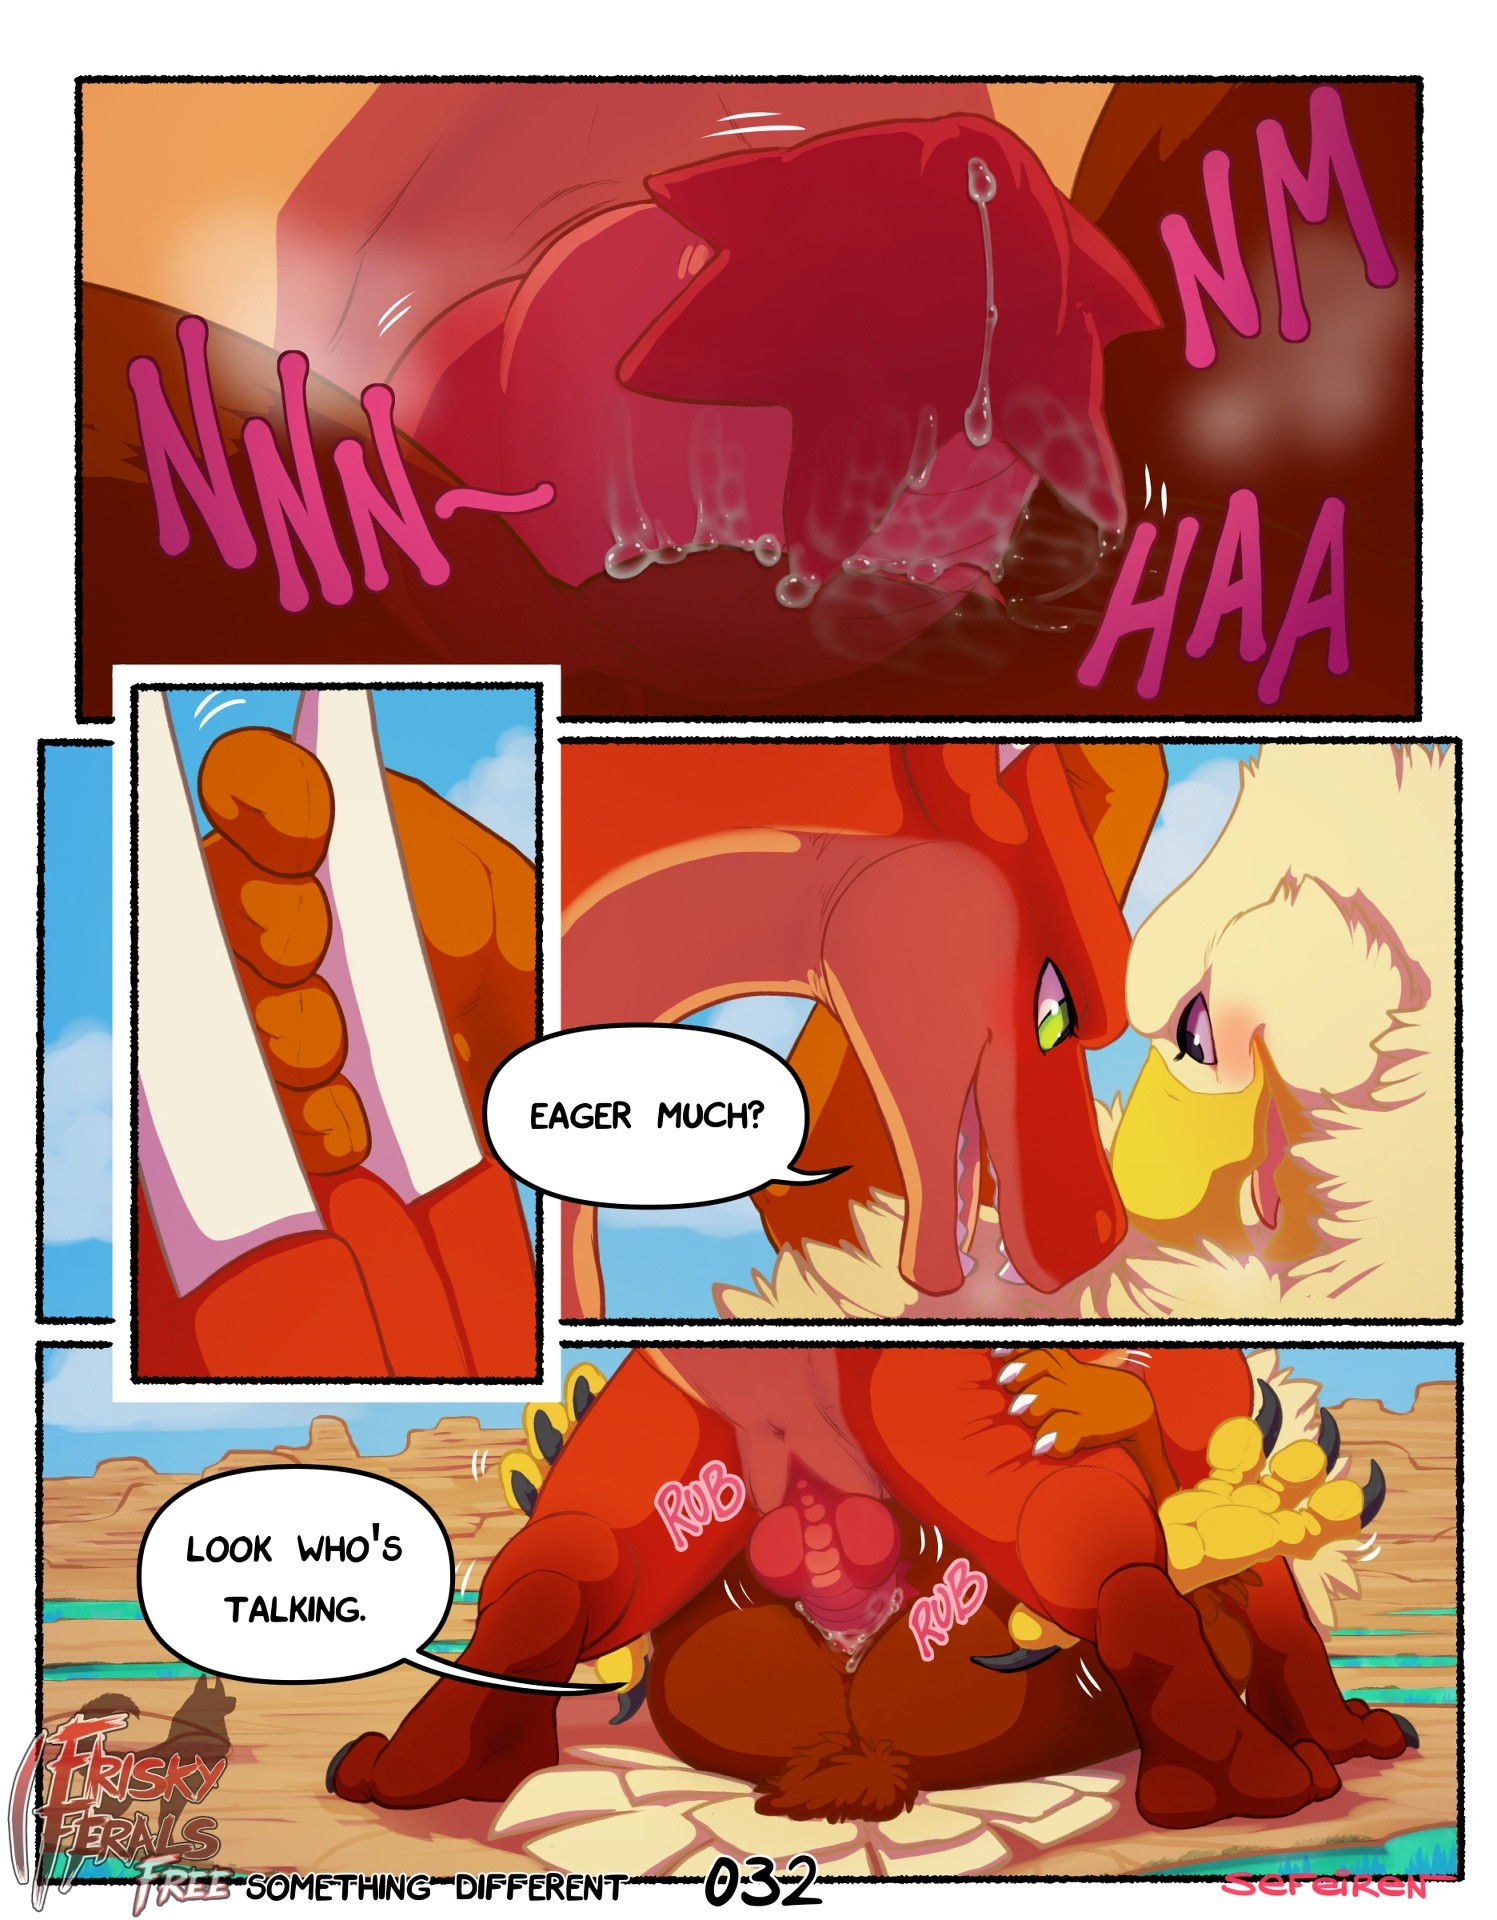 Frisky Ferals - Something Different porn comic picture 32